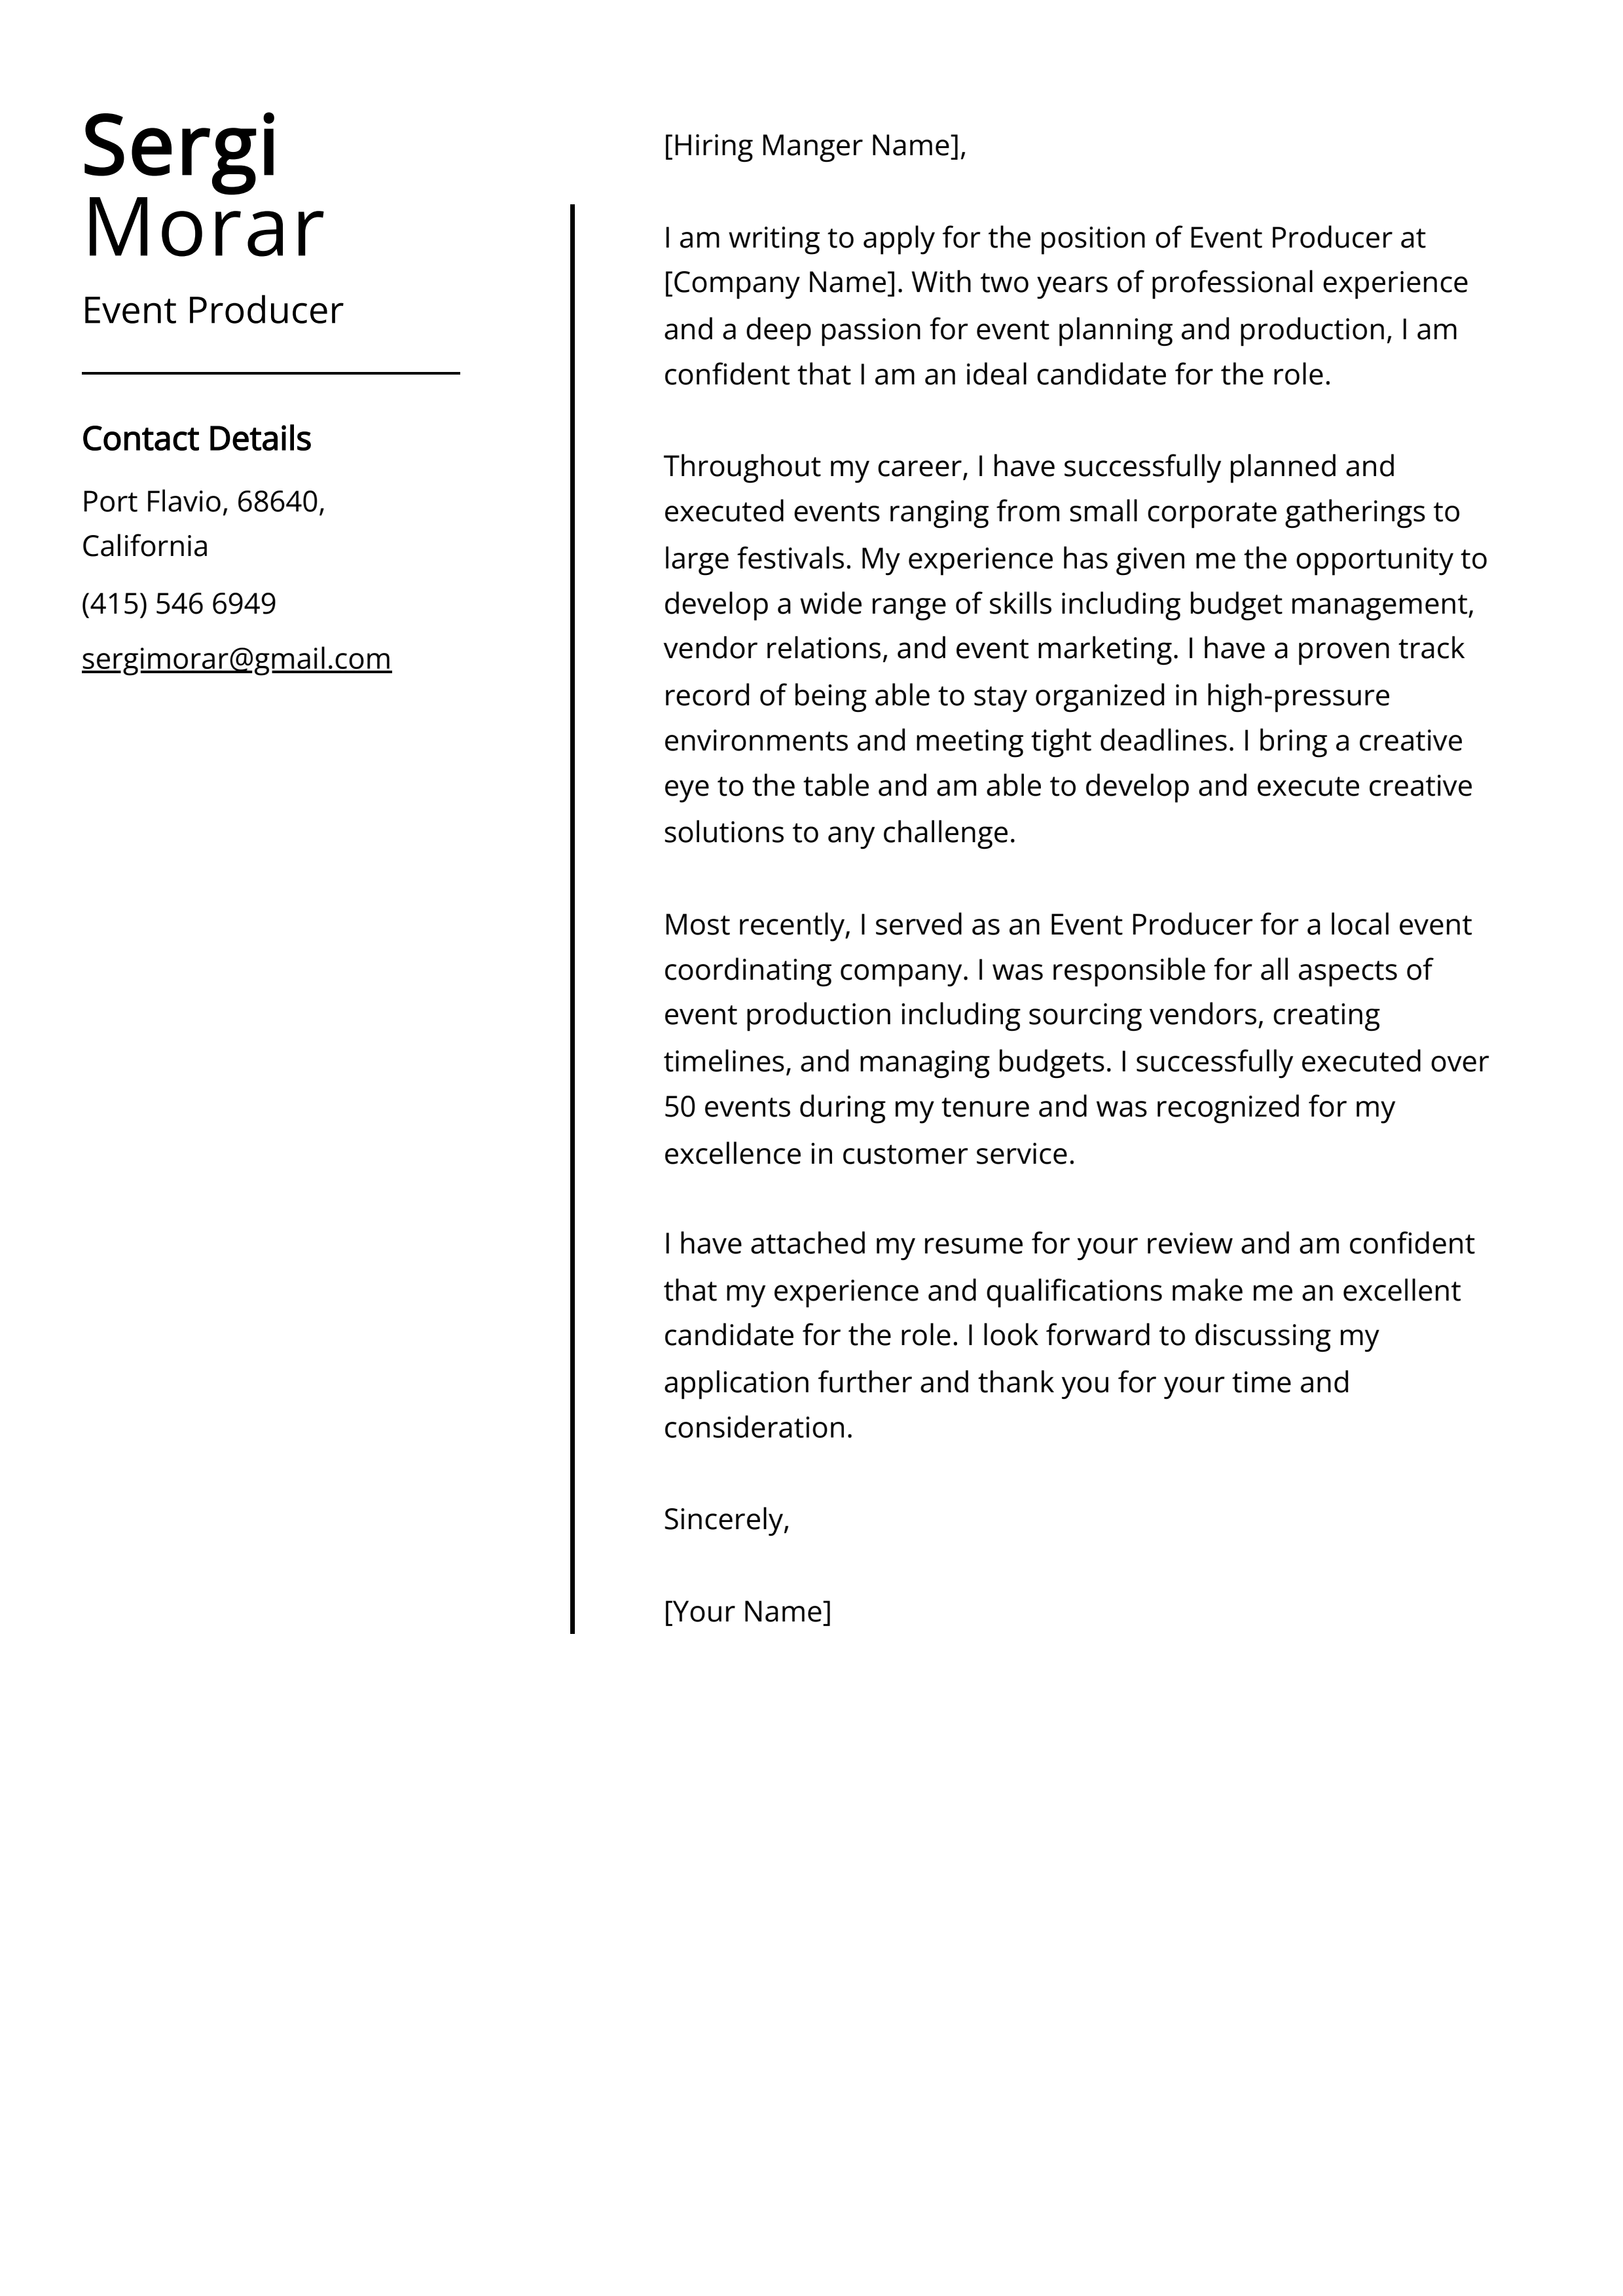 Event Producer Cover Letter Example